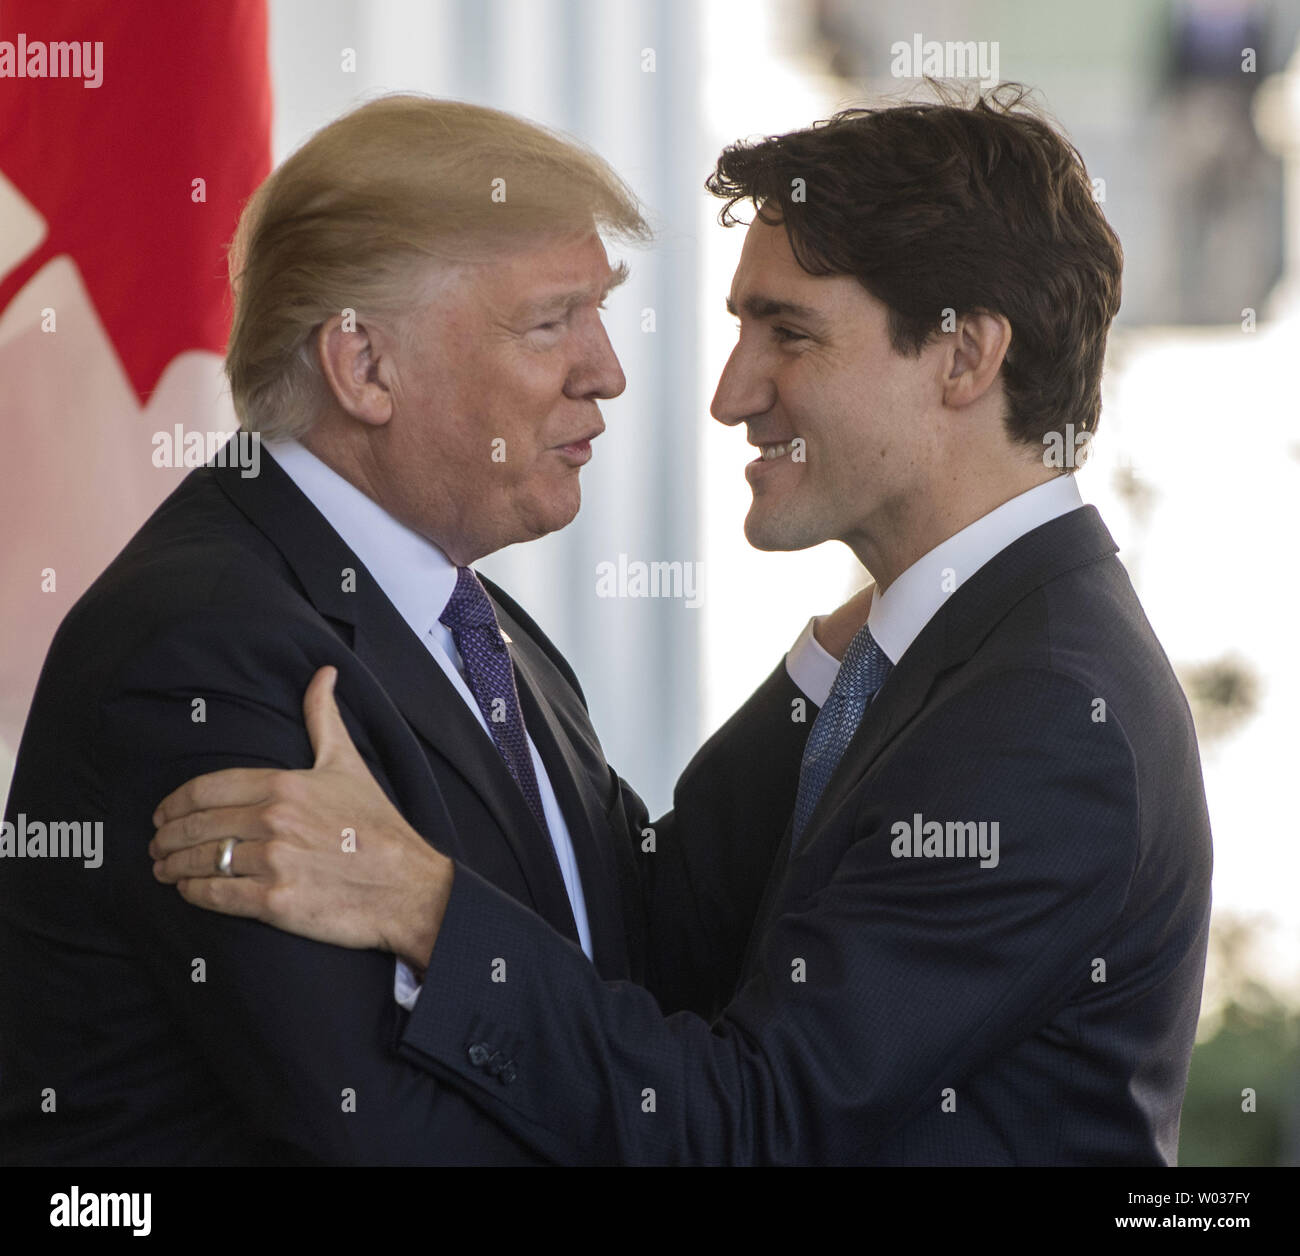 U.S. President Donald Trump greets Canada's Prime Minister Justin Trudeau on a windy day to the West Wing of the White House in Washington D.C. on February 13, 2017. The two leaders will have meetings and a press conference later in the day. Photo by Pat Benic/UPI Stock Photo